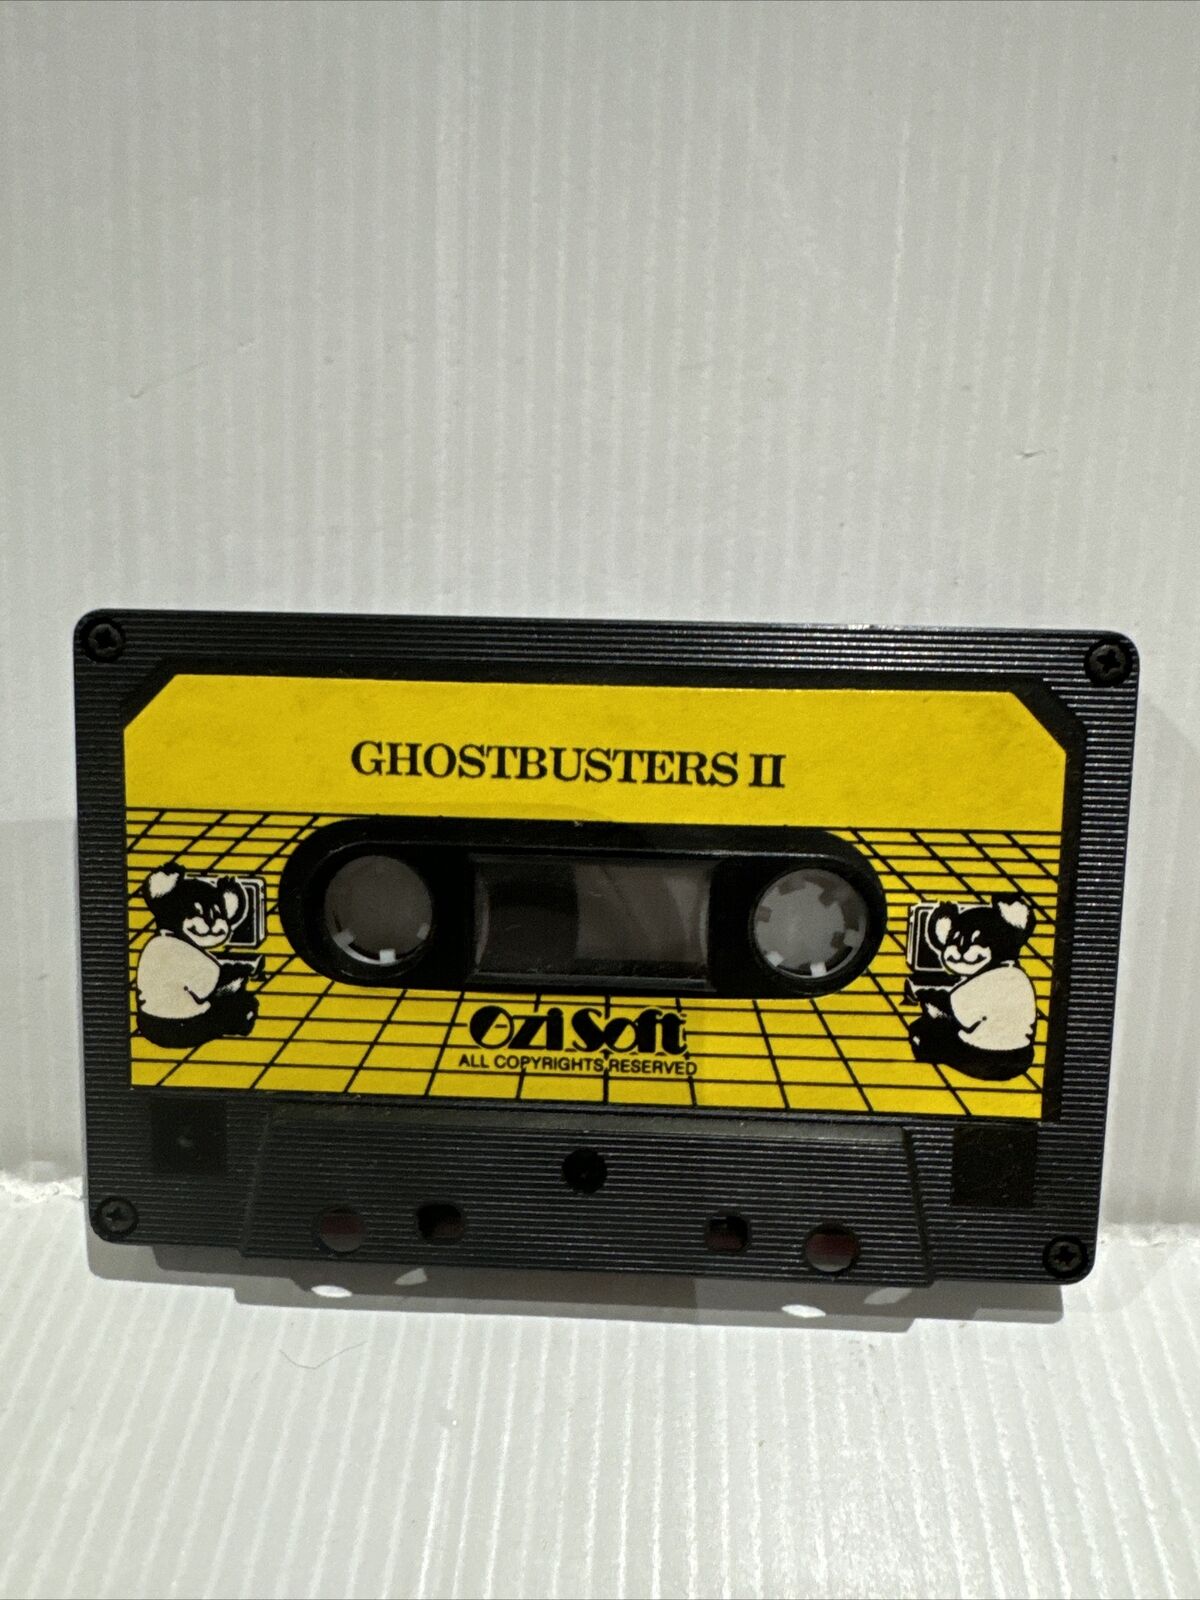 Ghostbusters II Cassette OziSoft Tape Vintage Game